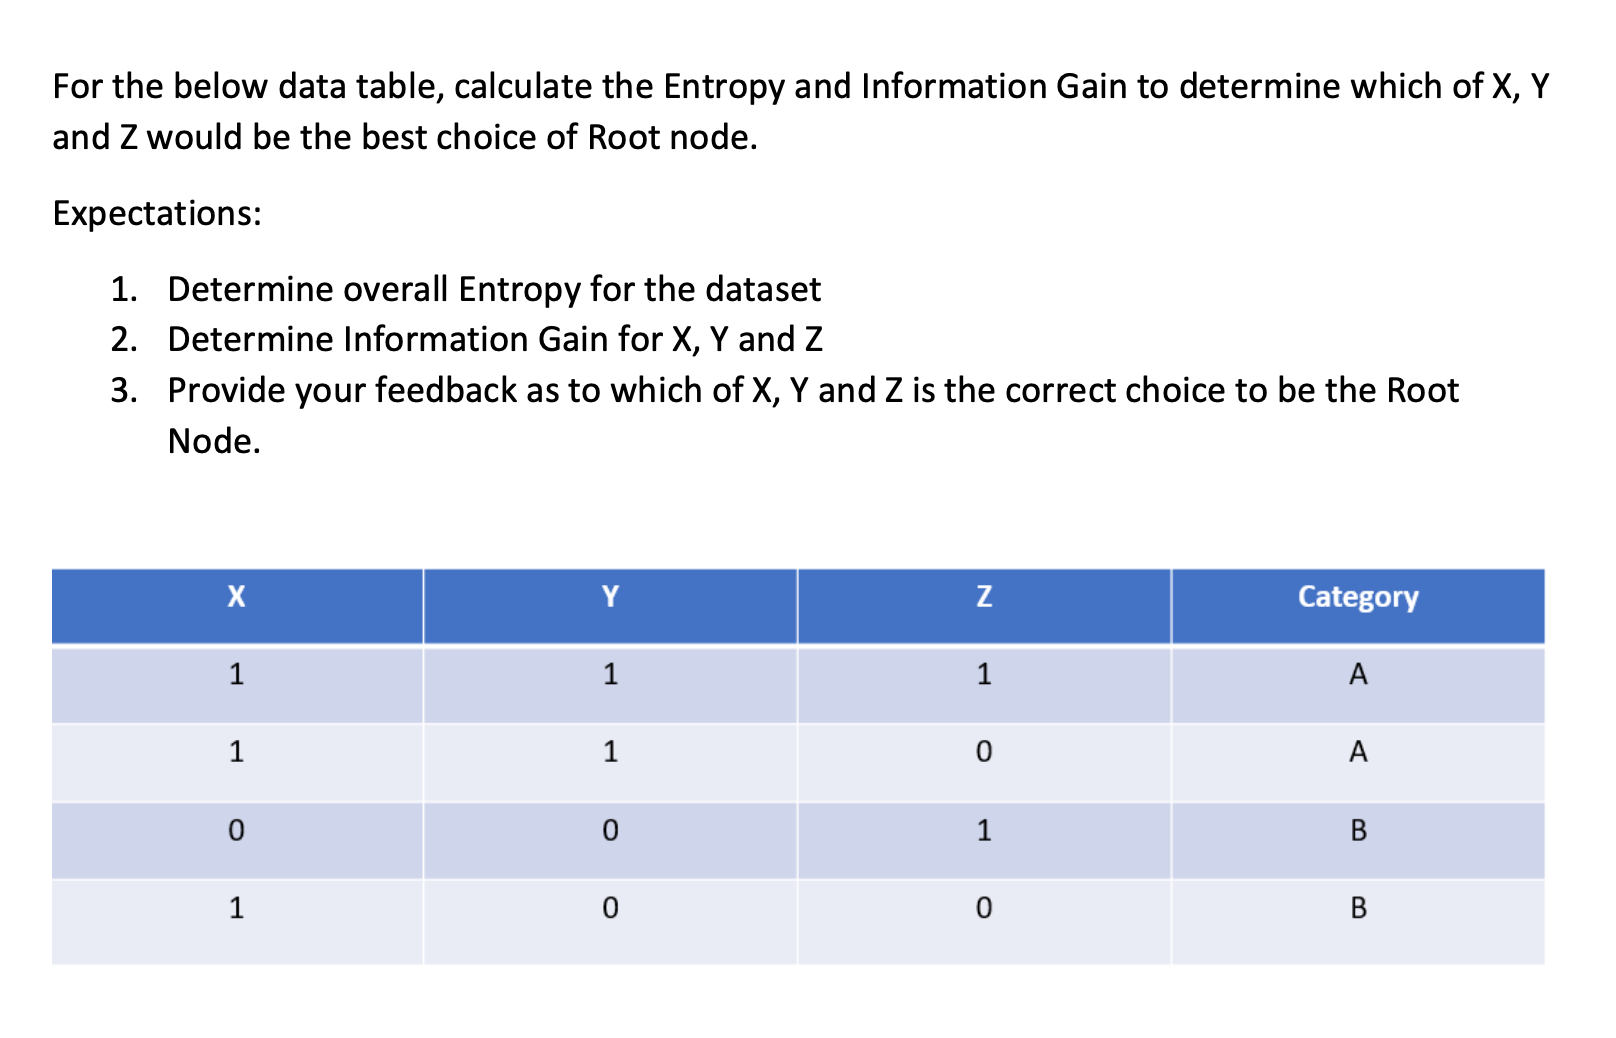 For the below data table, calculate the Entropy and Information Gain to determine which of X, Y and Z would